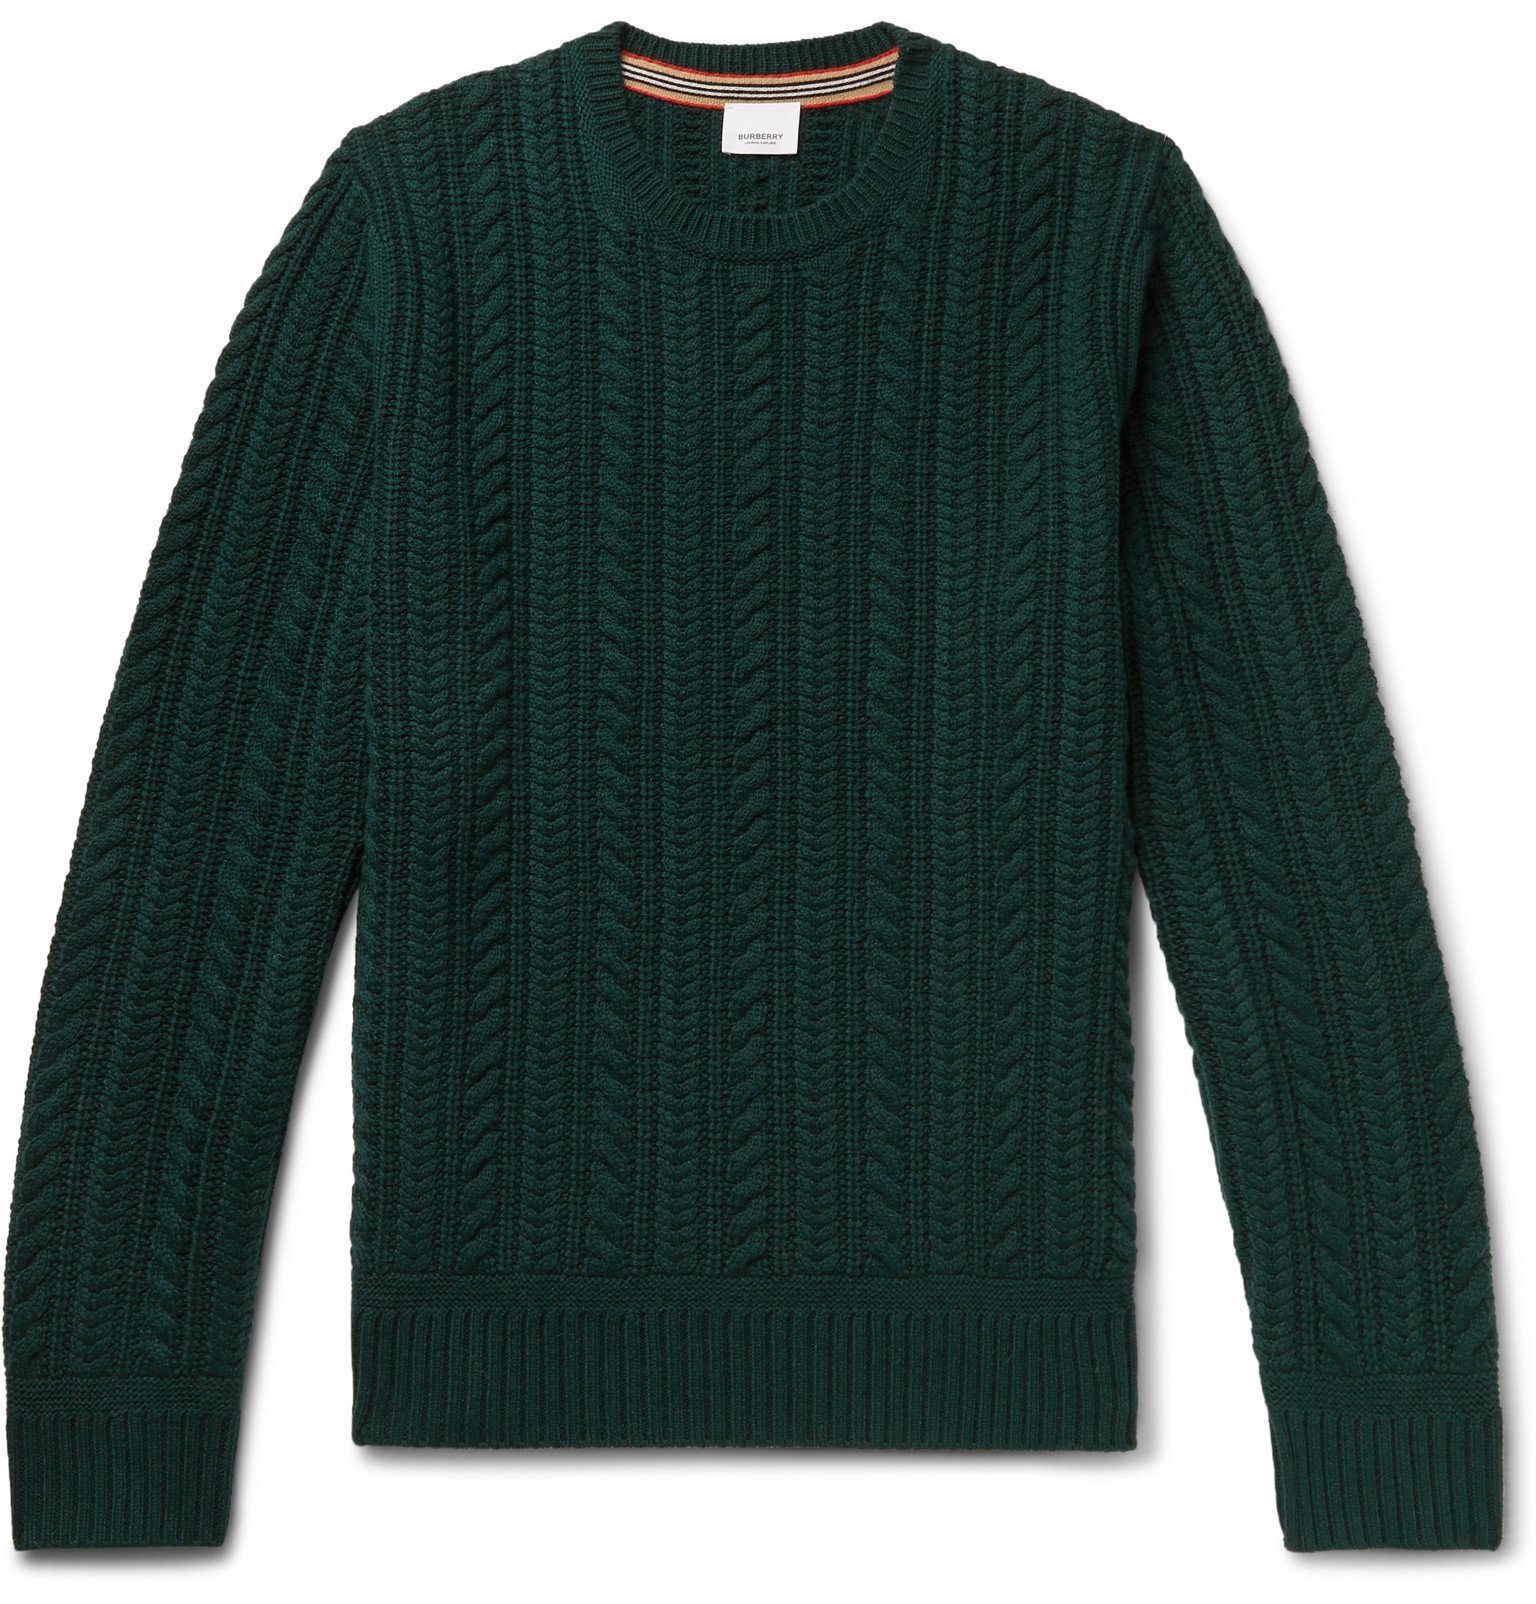 Burberry - Cable-Knit Sweater - Green Burberry